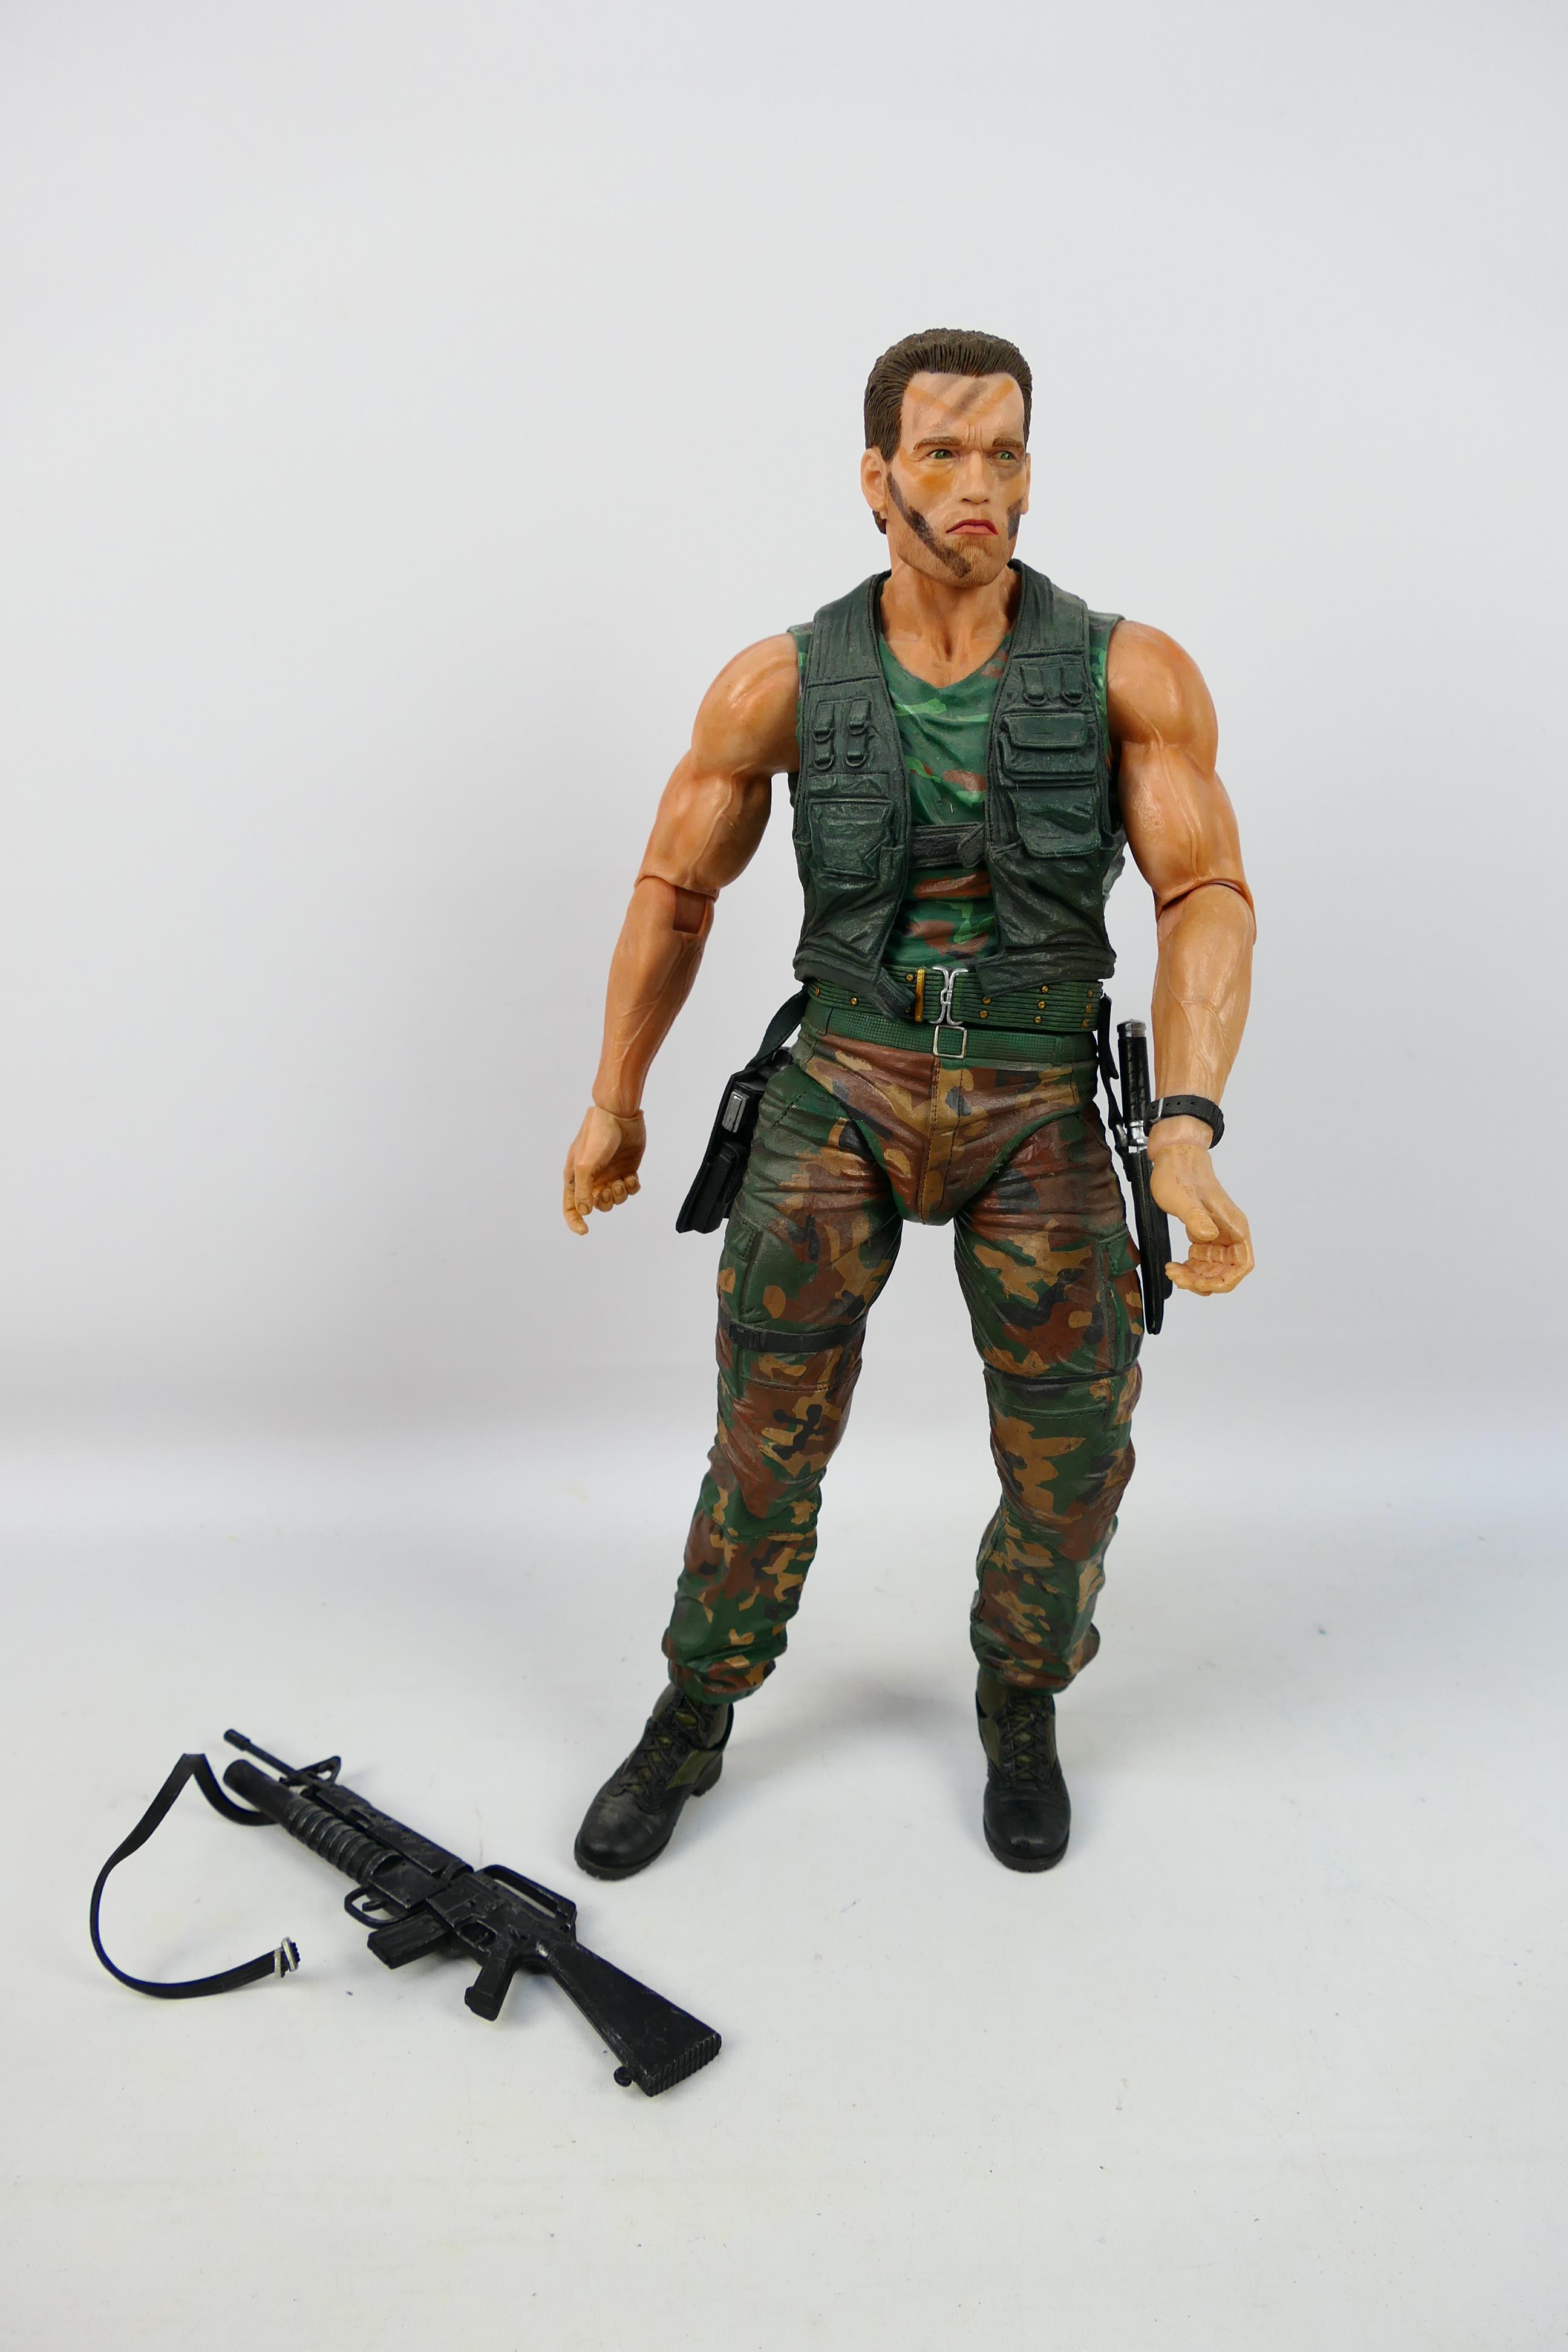 NECA - A 1:4 scale Dutch Action Figure (2013) based of the 1987 Predator film. - Image 2 of 8